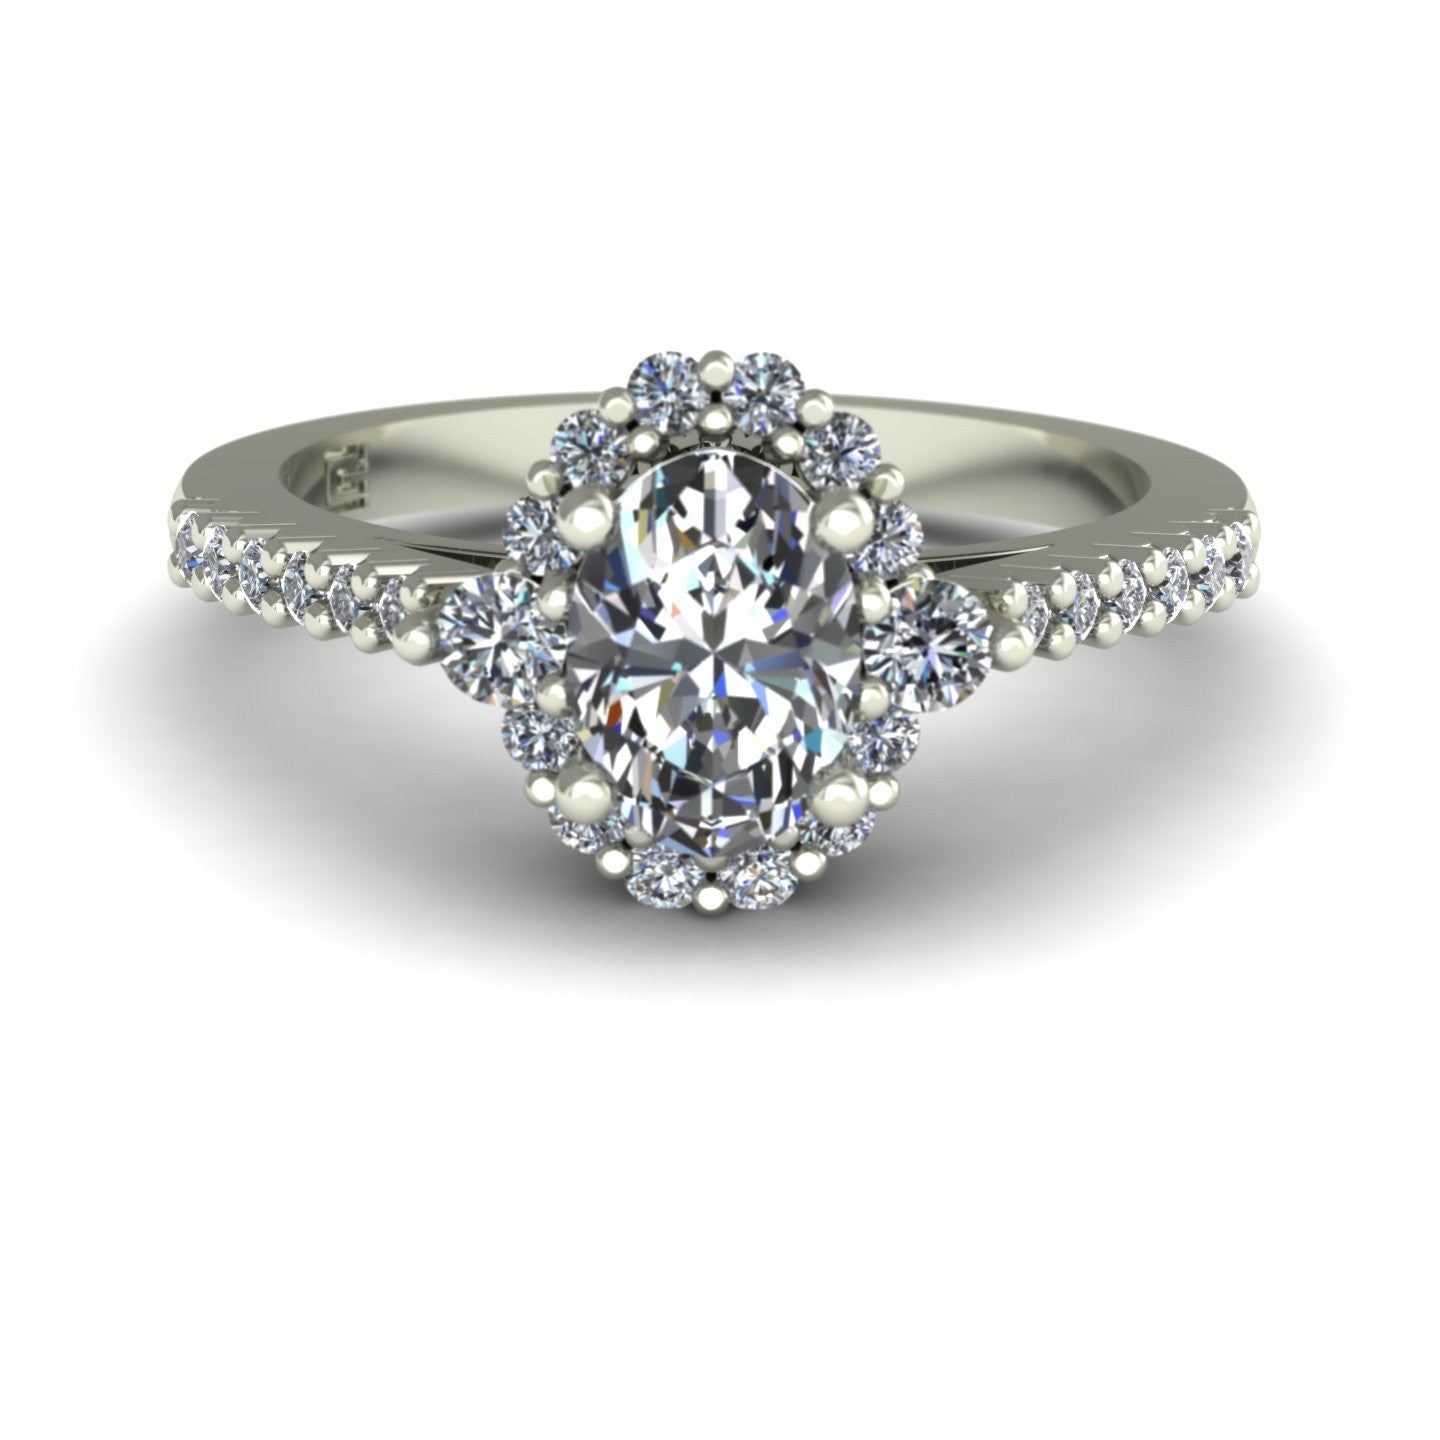 oval diamond engagement ring in 14k white gold - Charles Babb Designs - top view